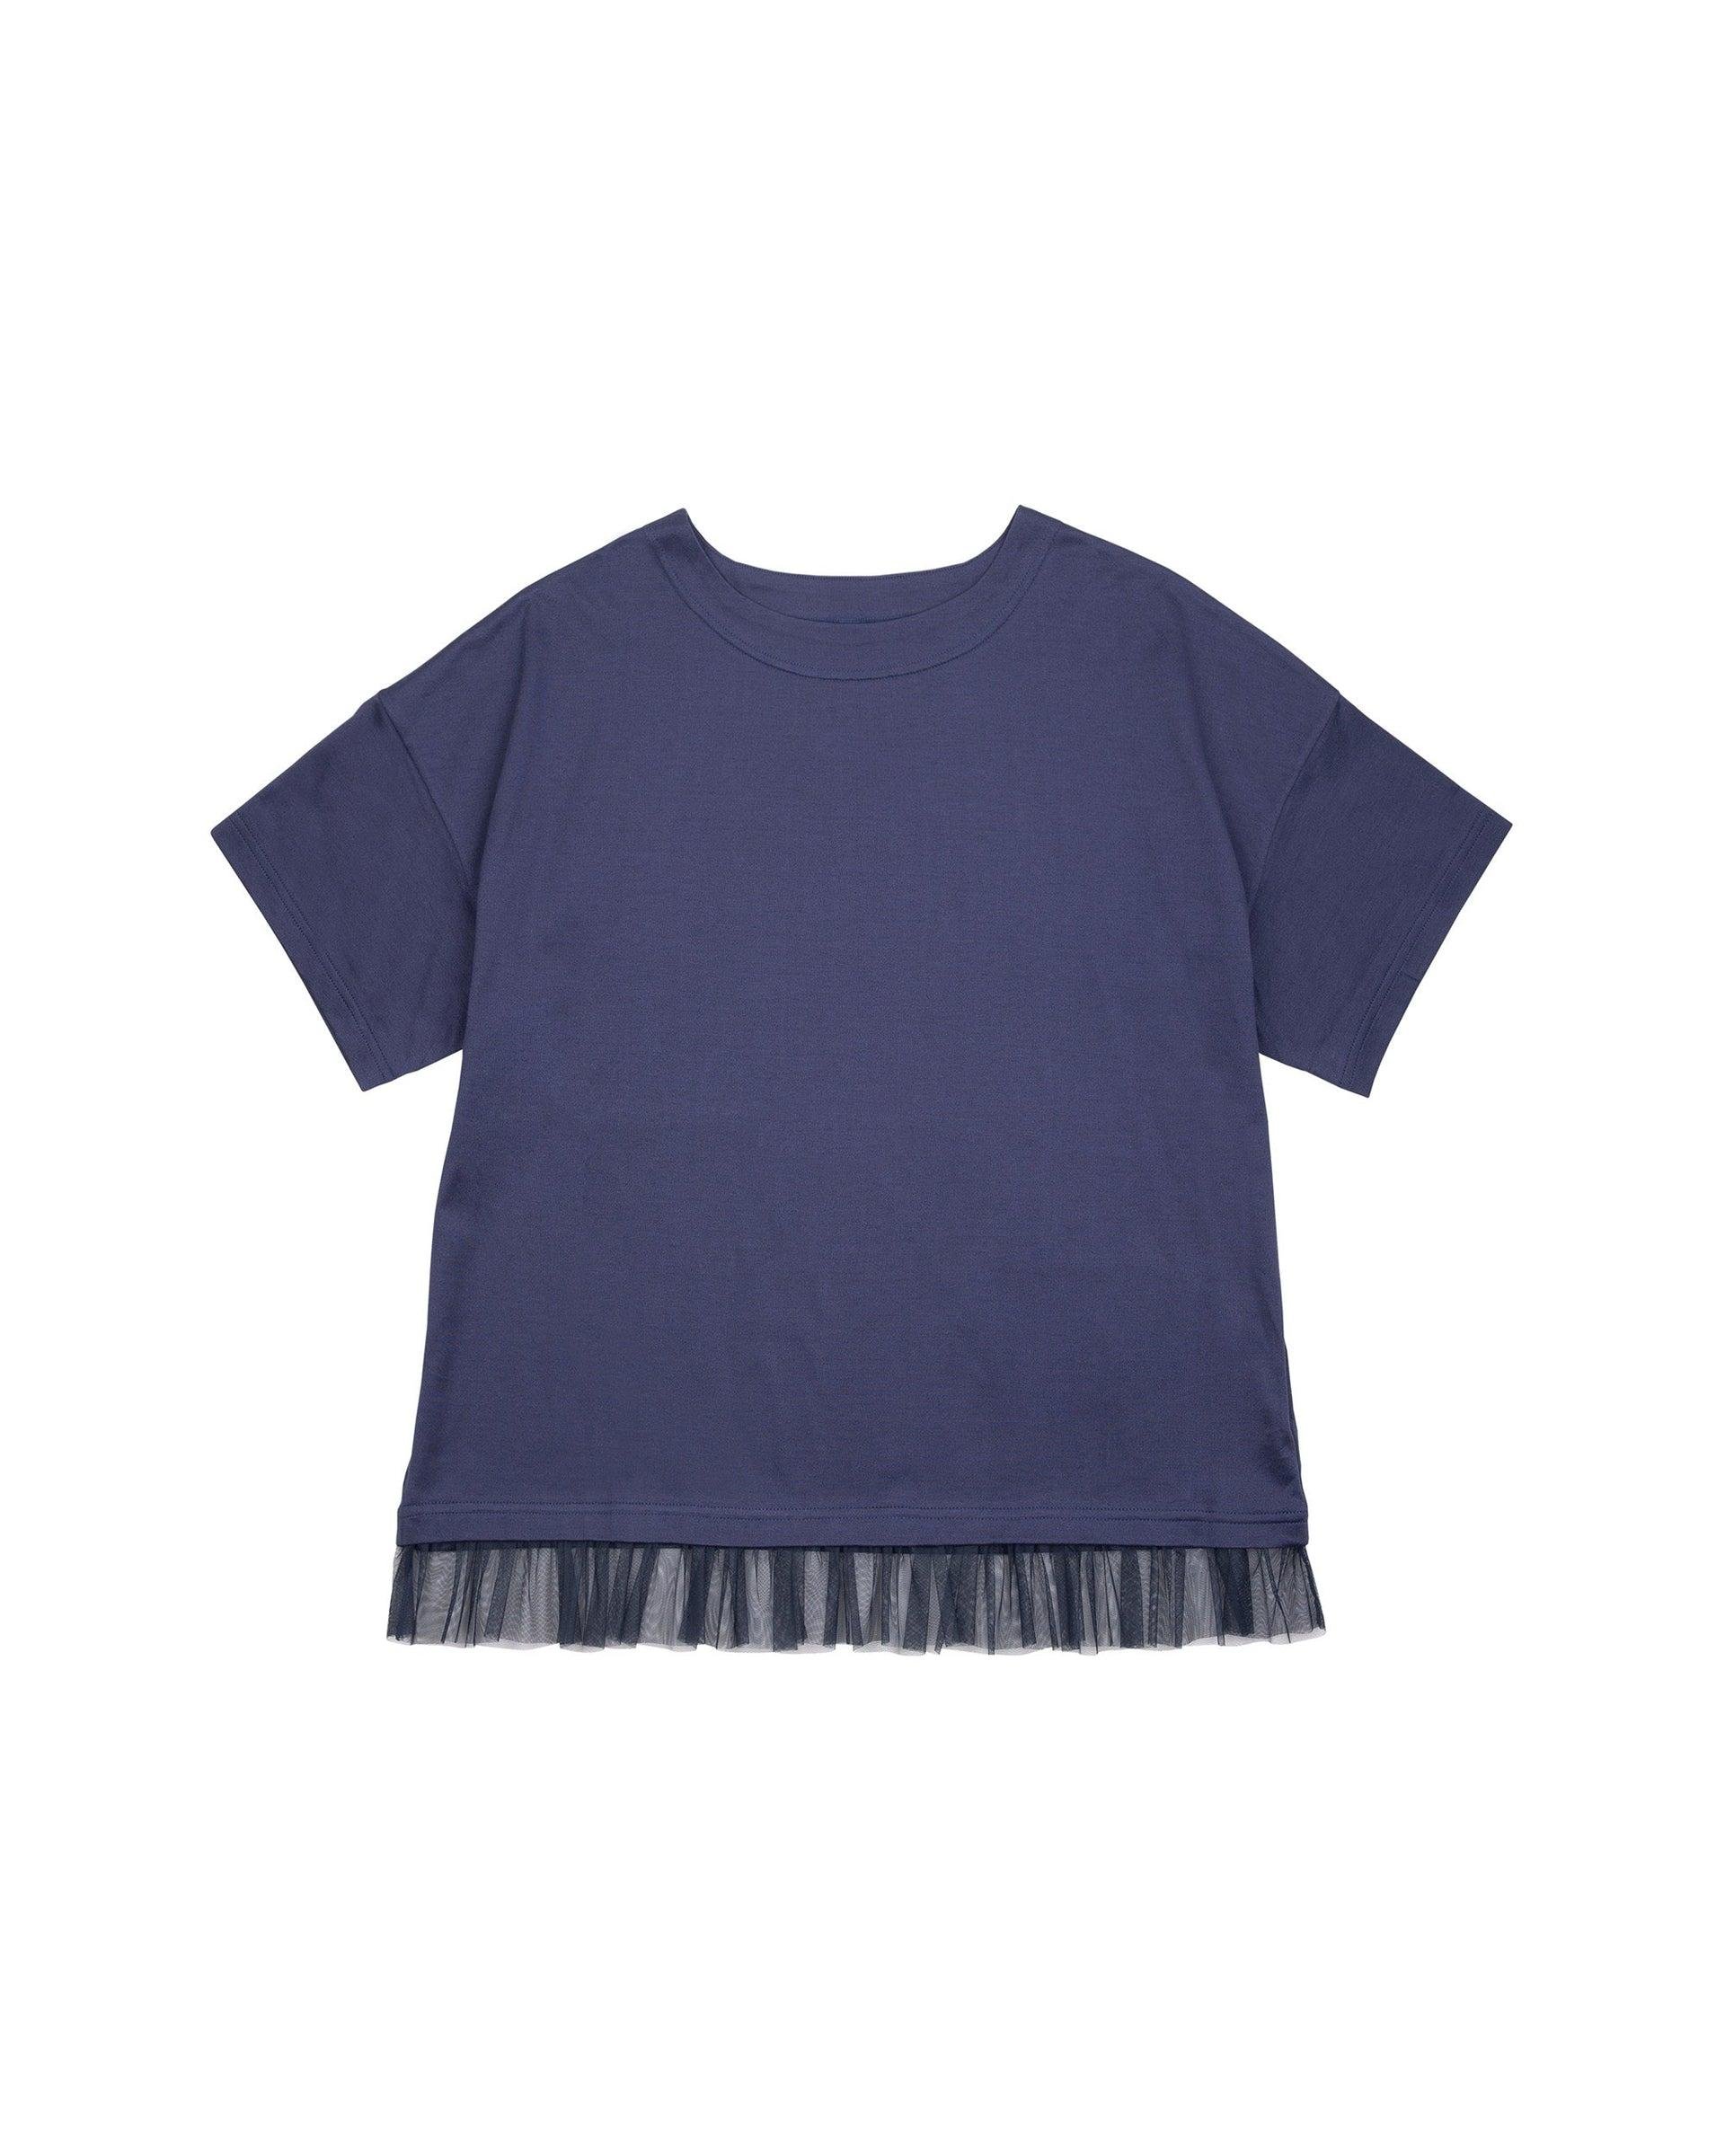 NORAH SUE Summer Jersey With Tulle Hem by COCKTAIL